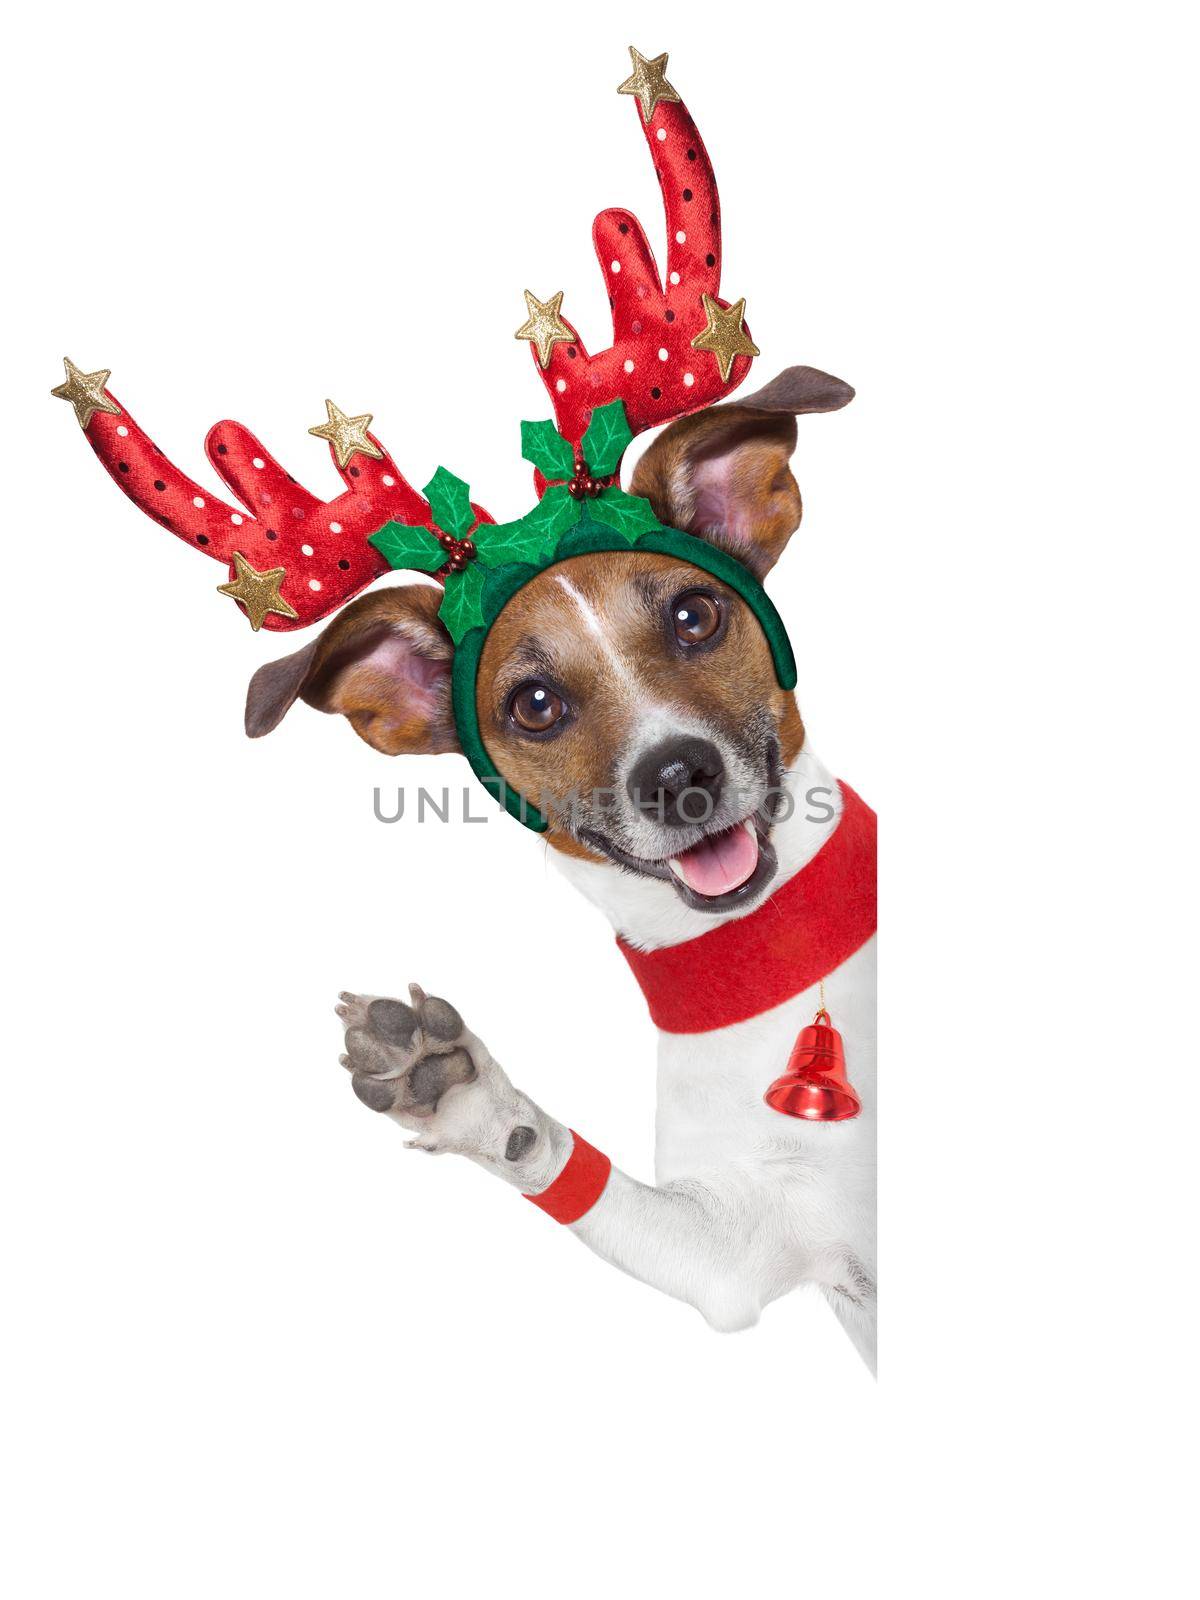 reindeer dog behind a blank banner with waving with paw